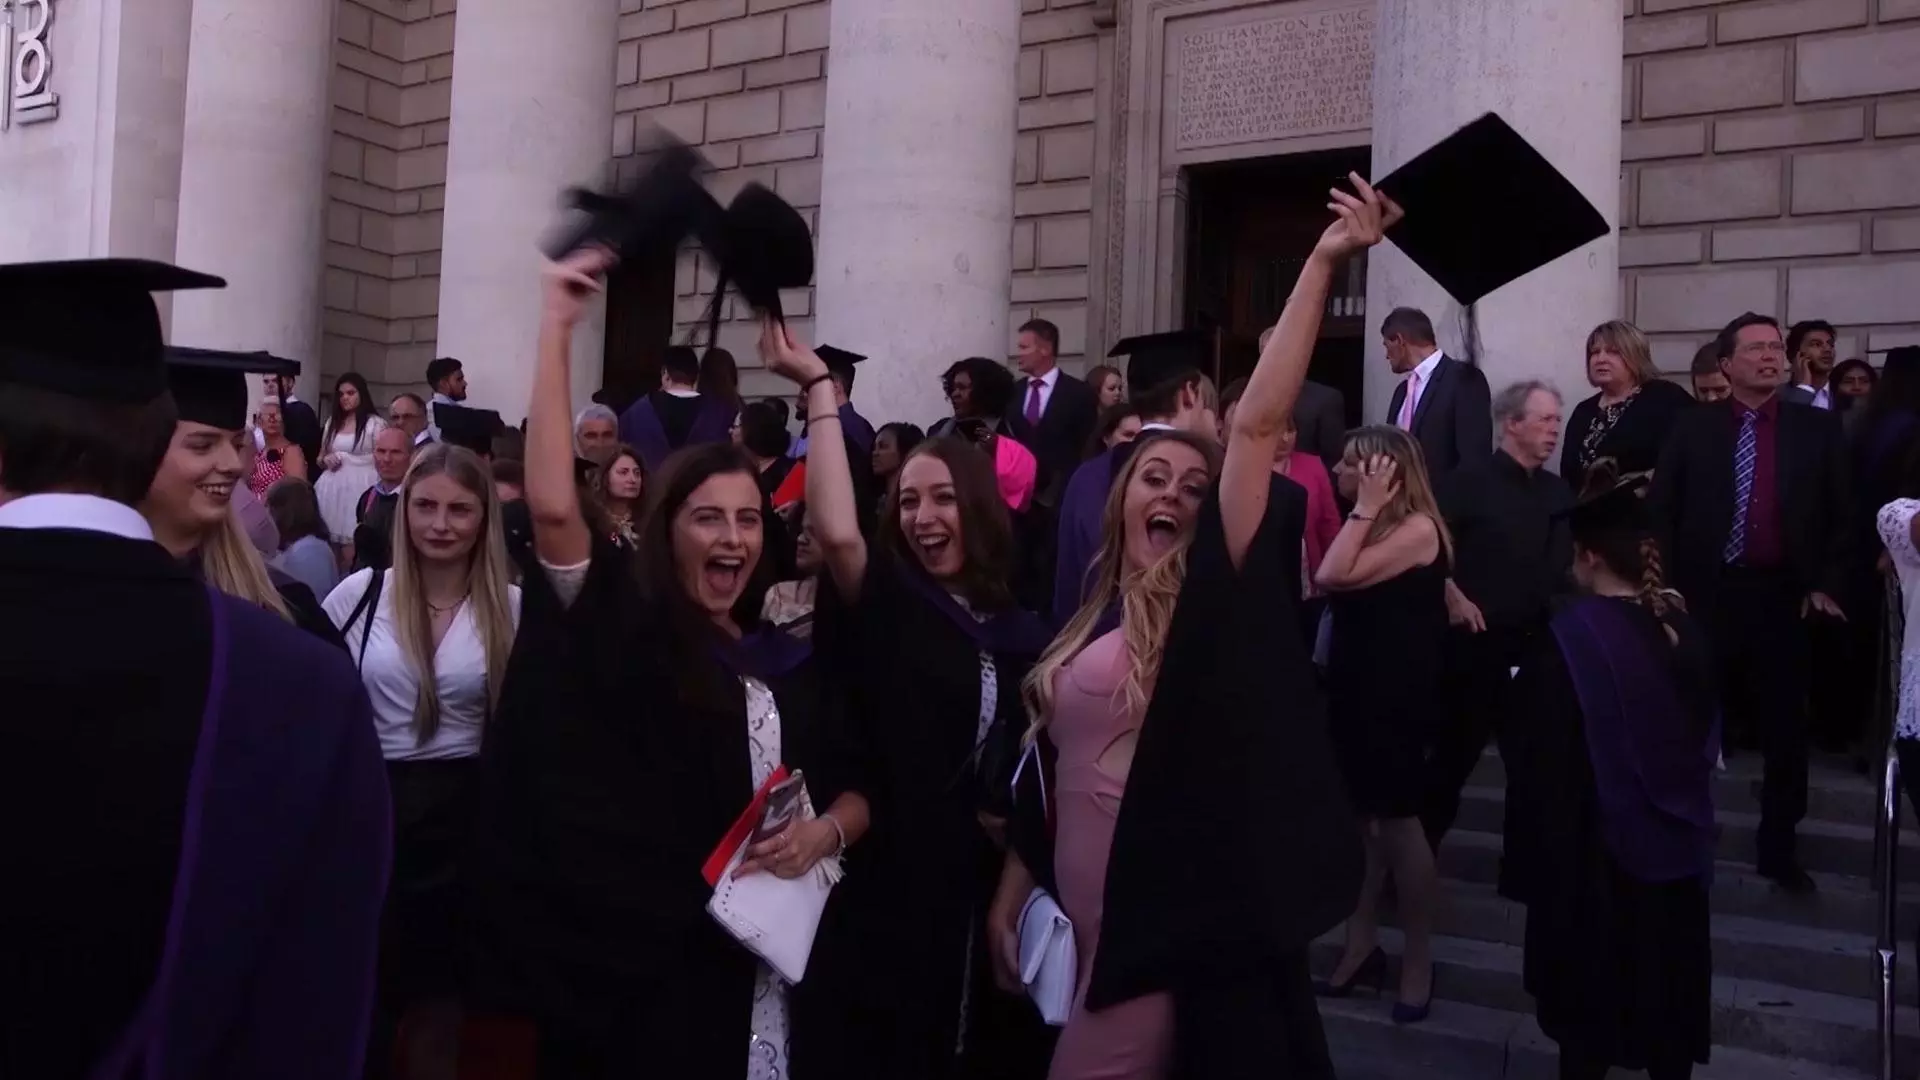 Solent graduates throwing their mortarboards in the air